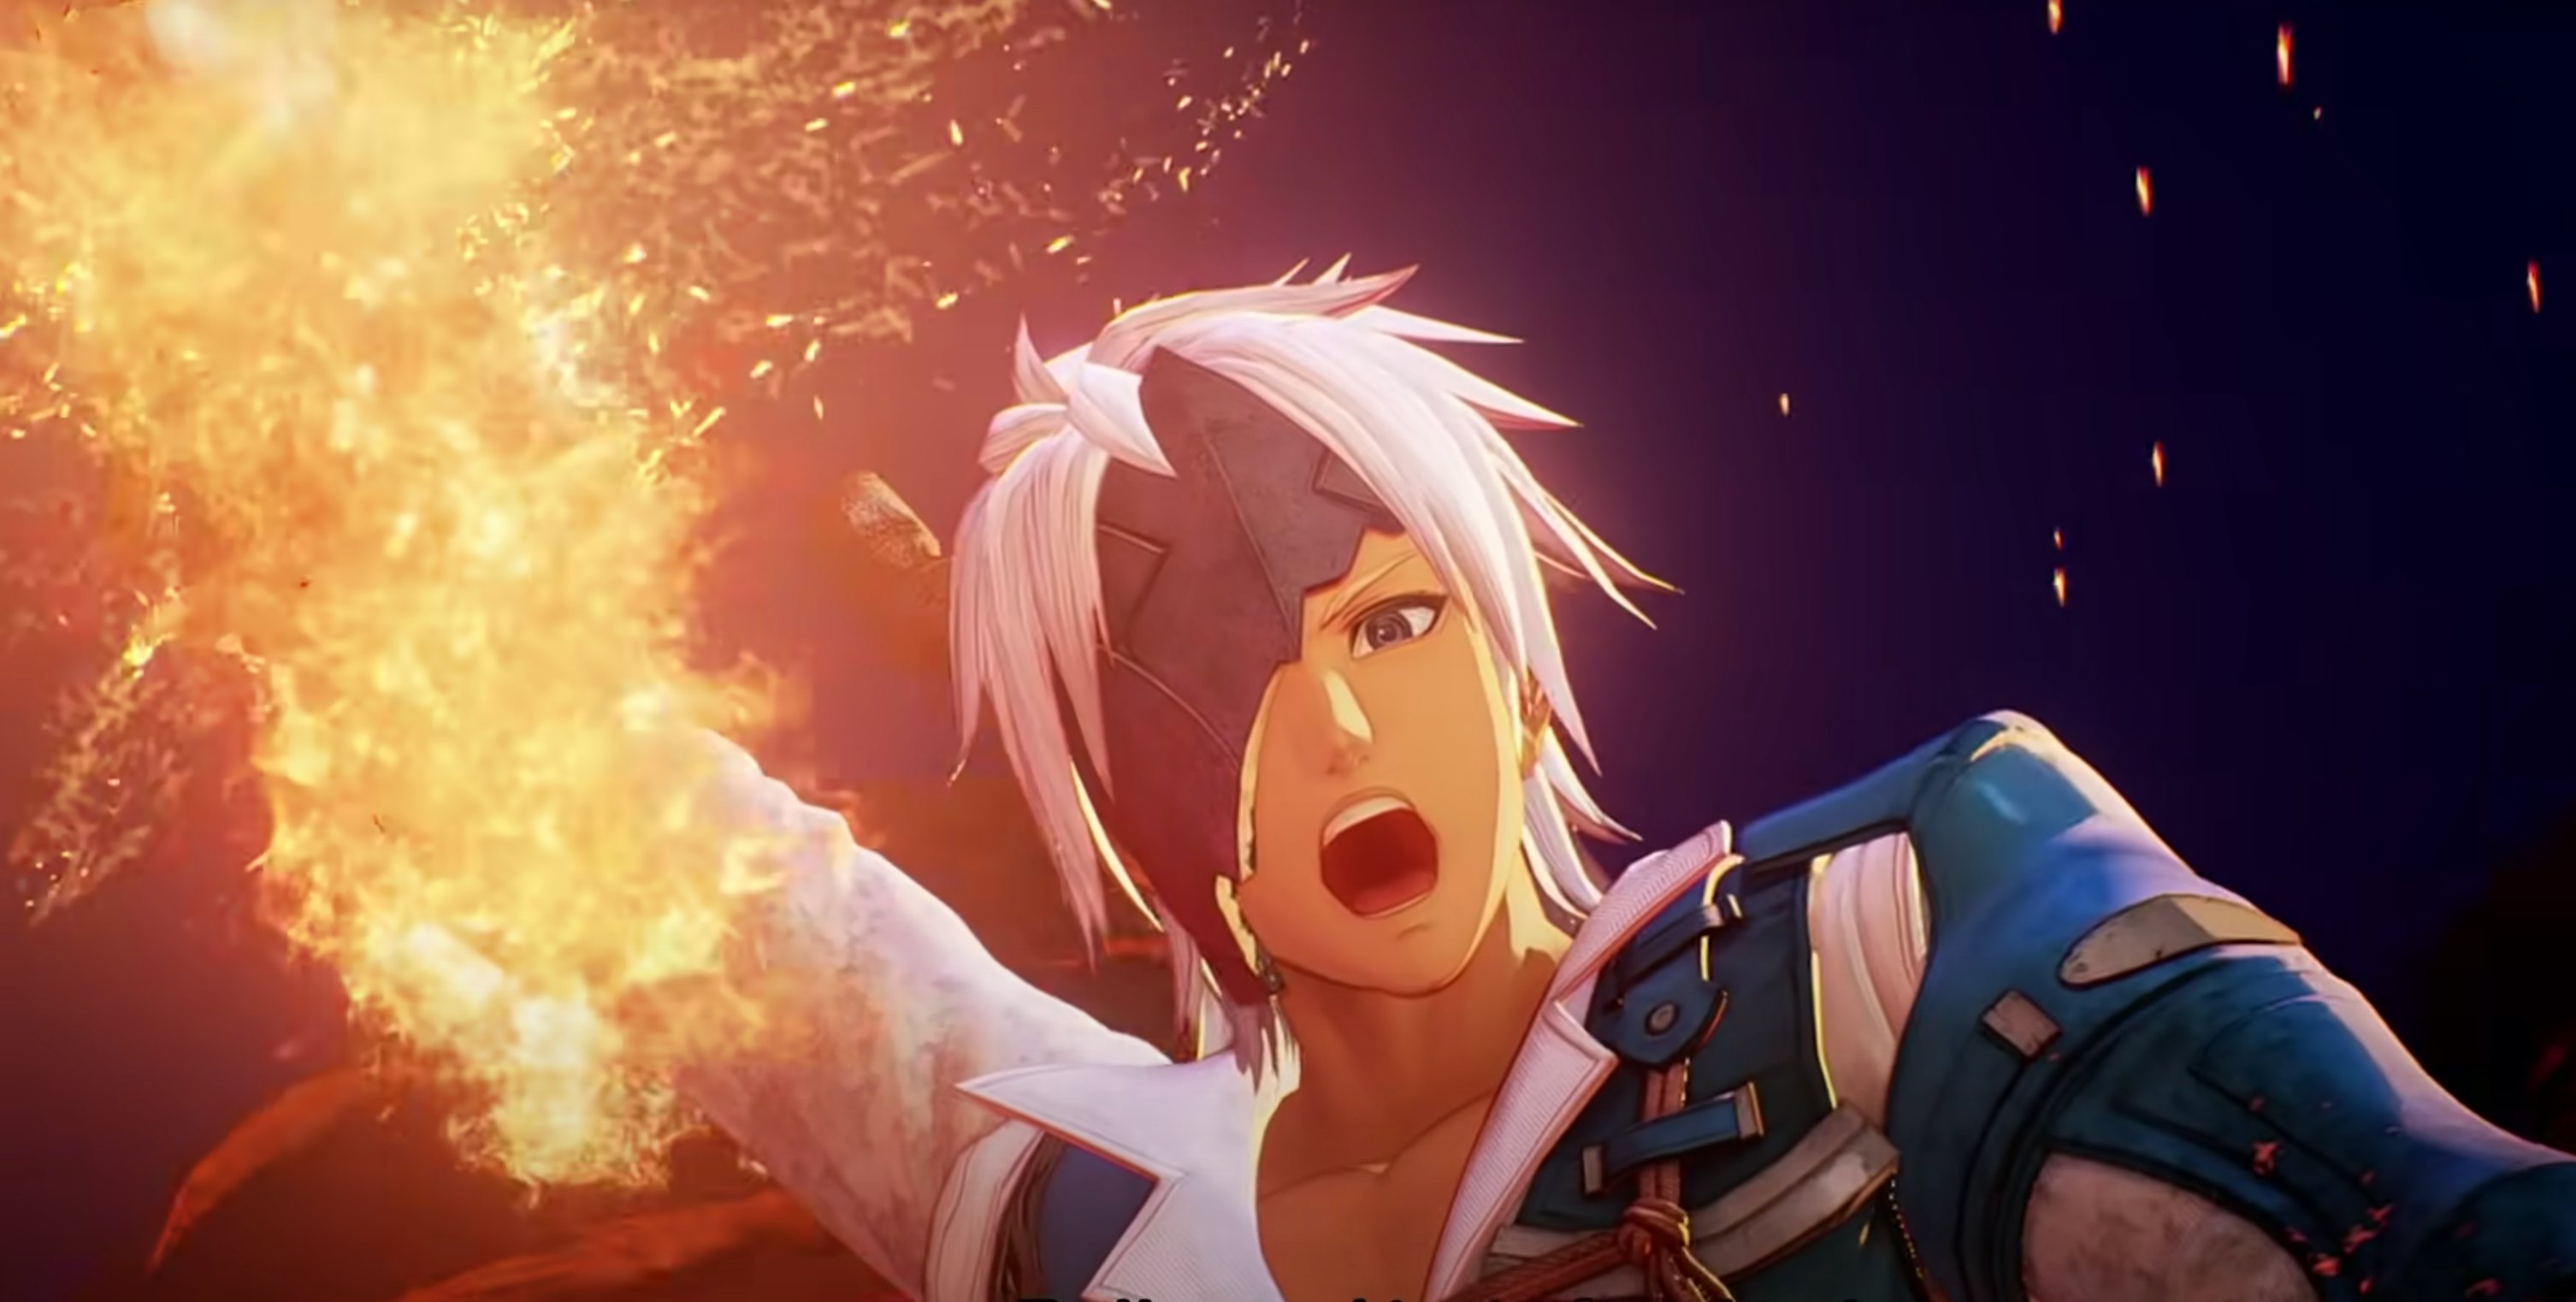 tales of arise release date